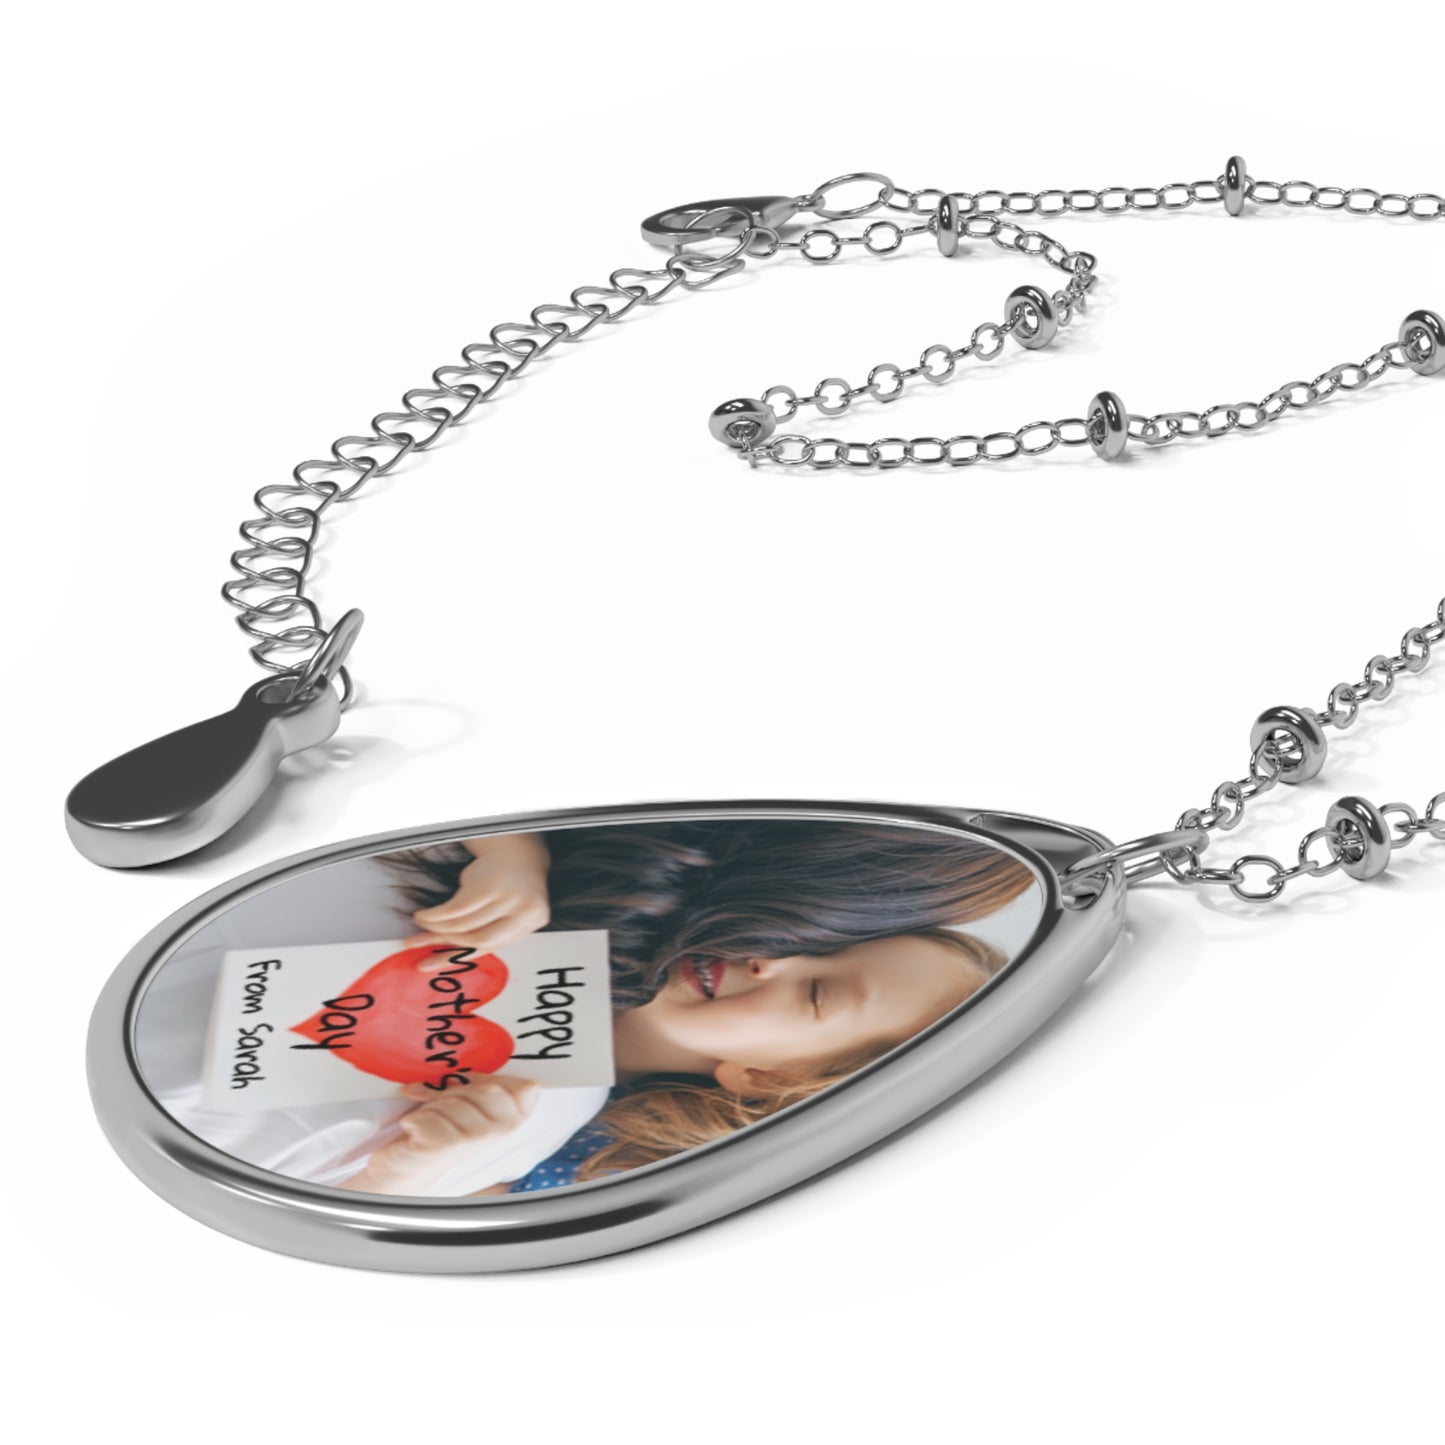 Personalized Oval Pendant Necklace - Mother's Day Special *SOLD OUT*